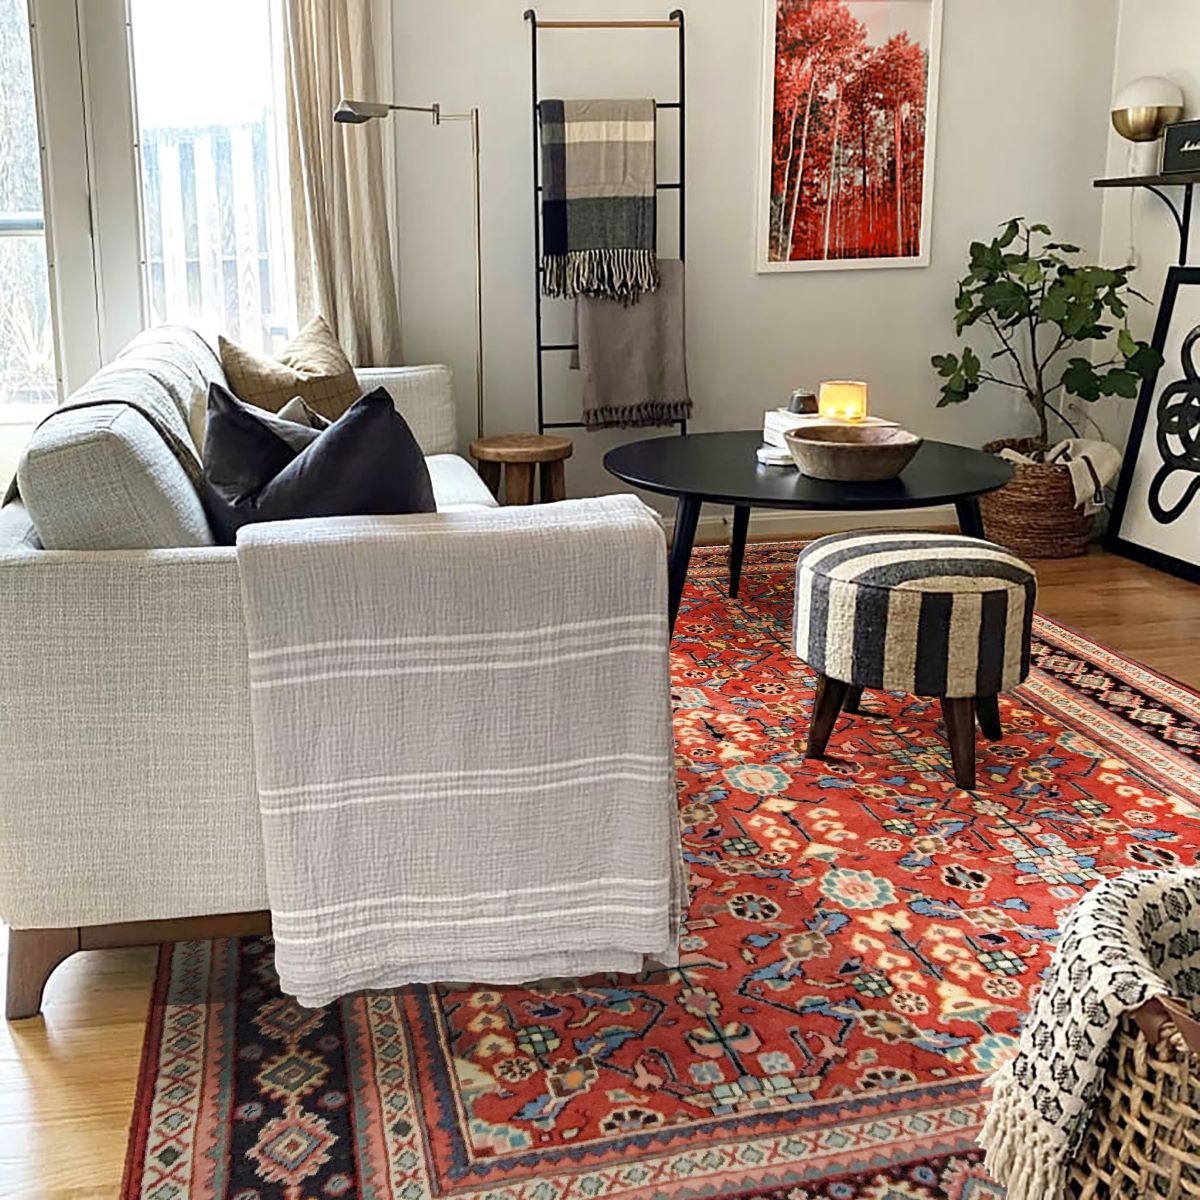 How To Value Persian Rugs